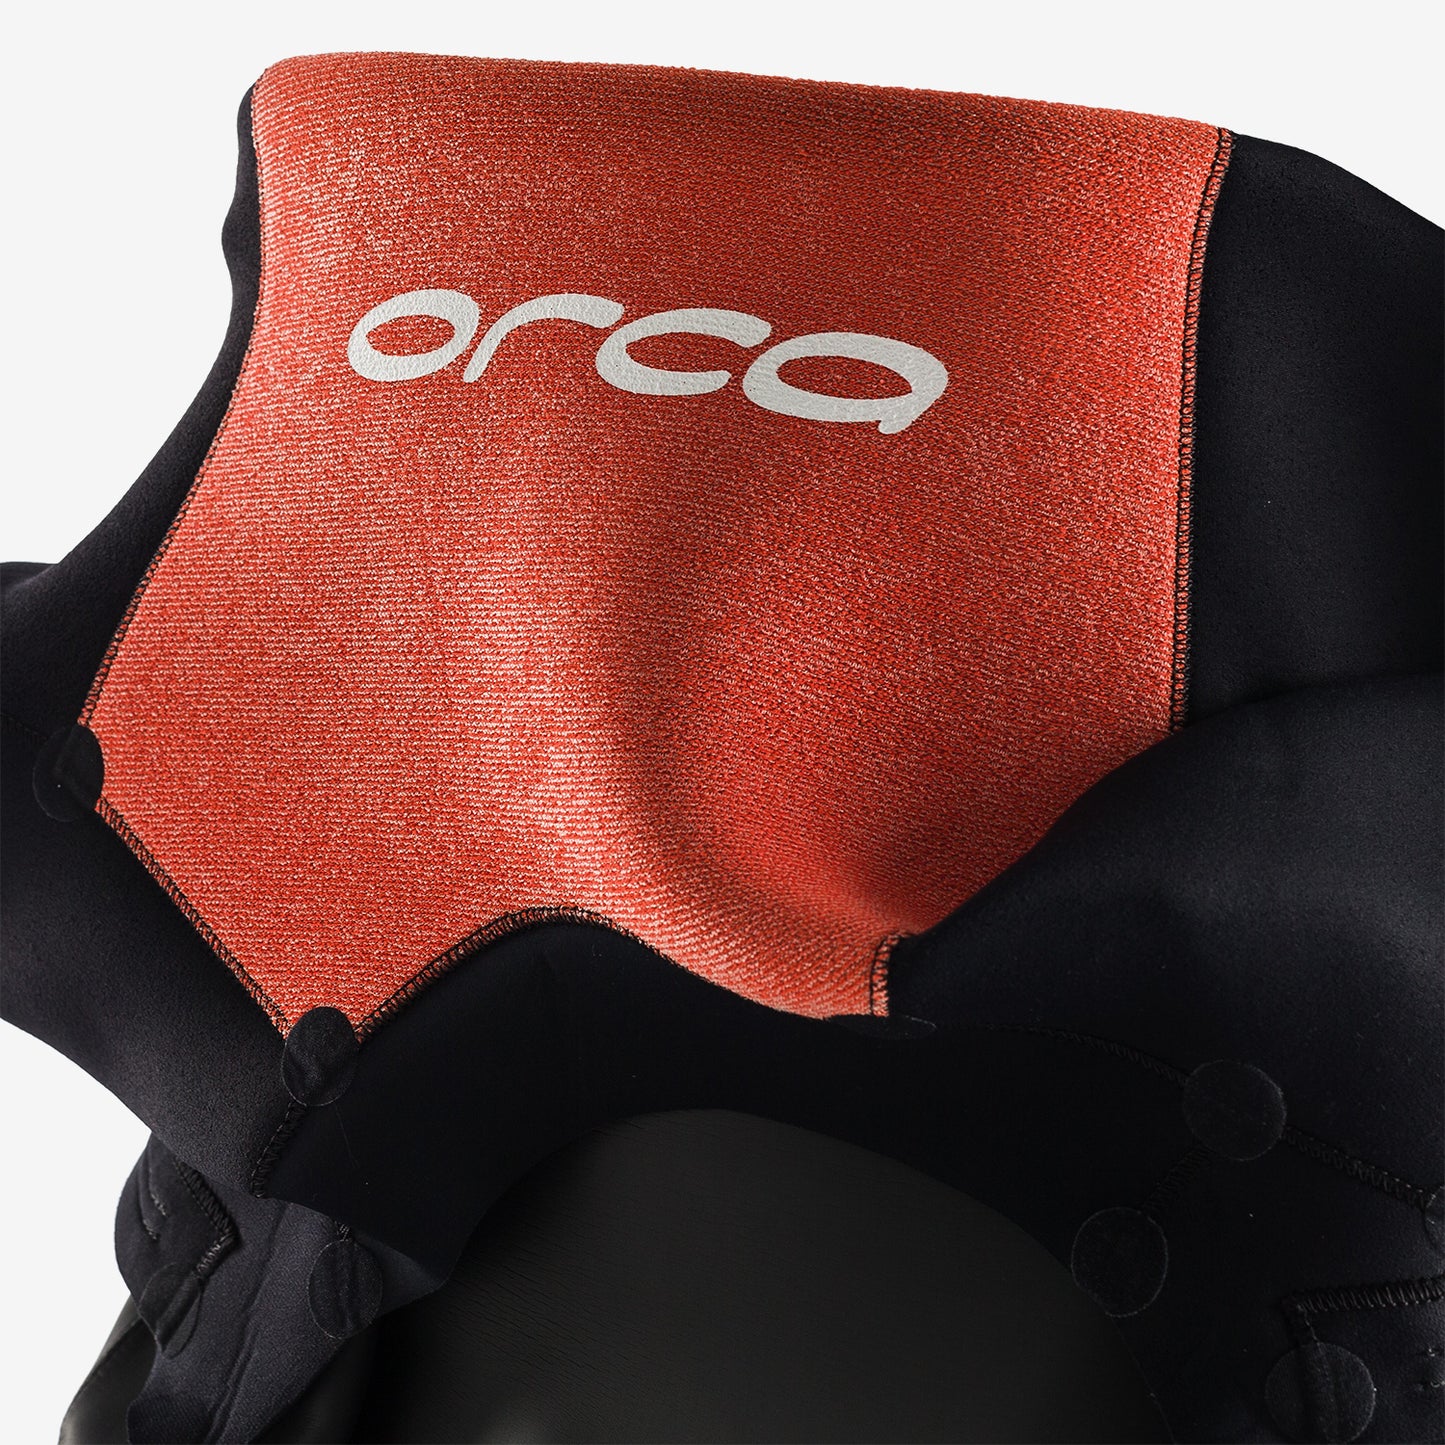 WOMENS ORCA RS1 THERMAL OW BK